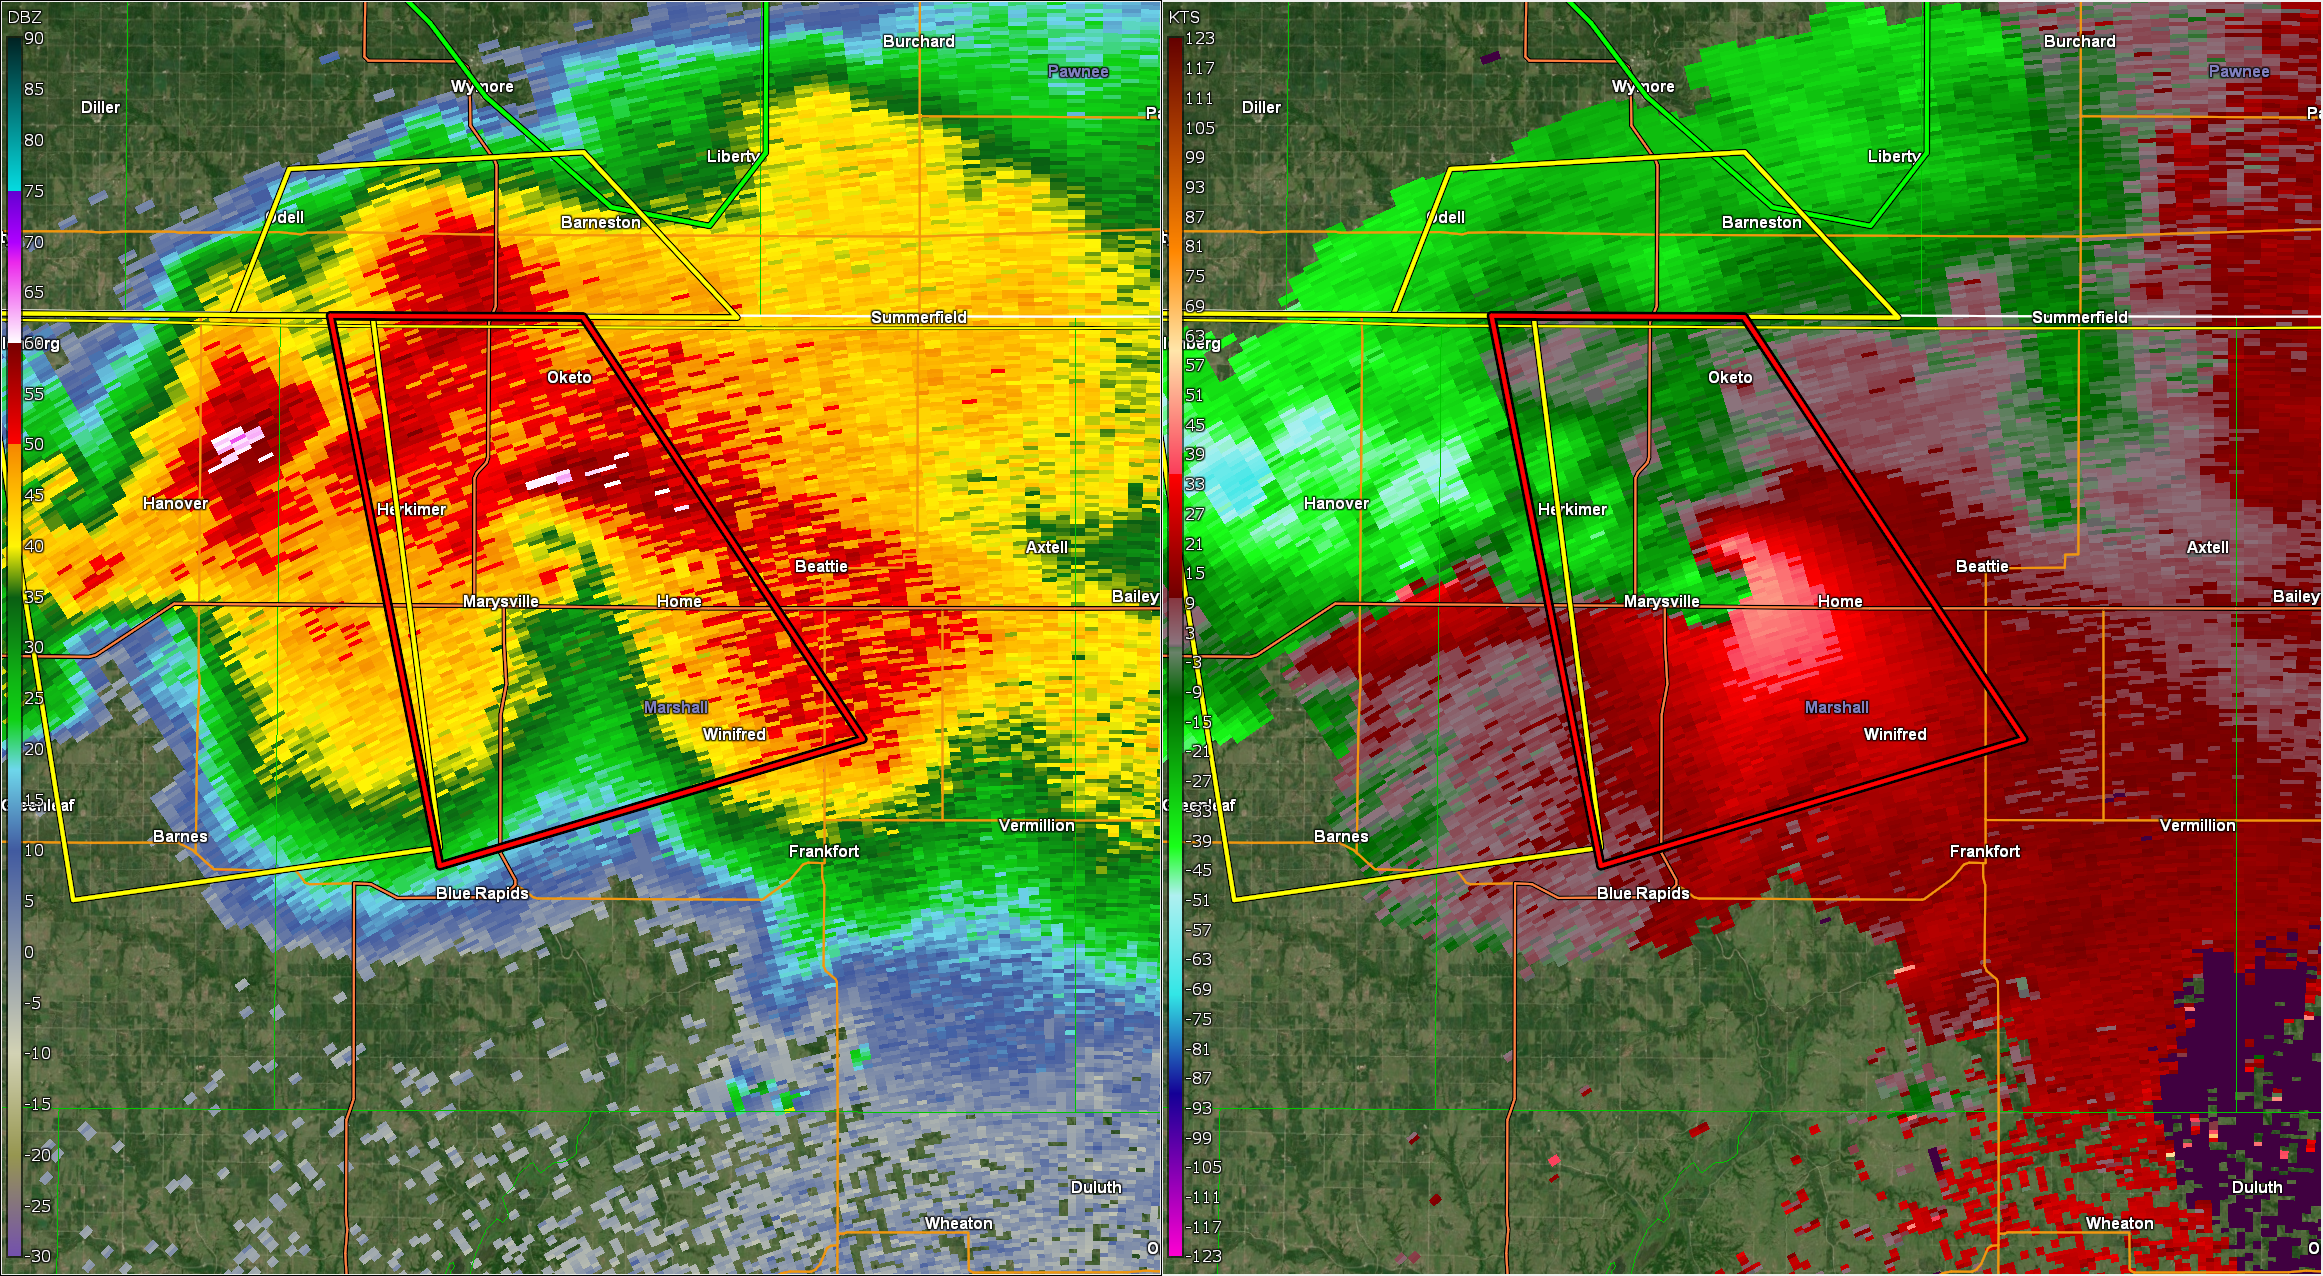 Radar at 6:05 PM with likely two tornadoes occurring near Marysville.